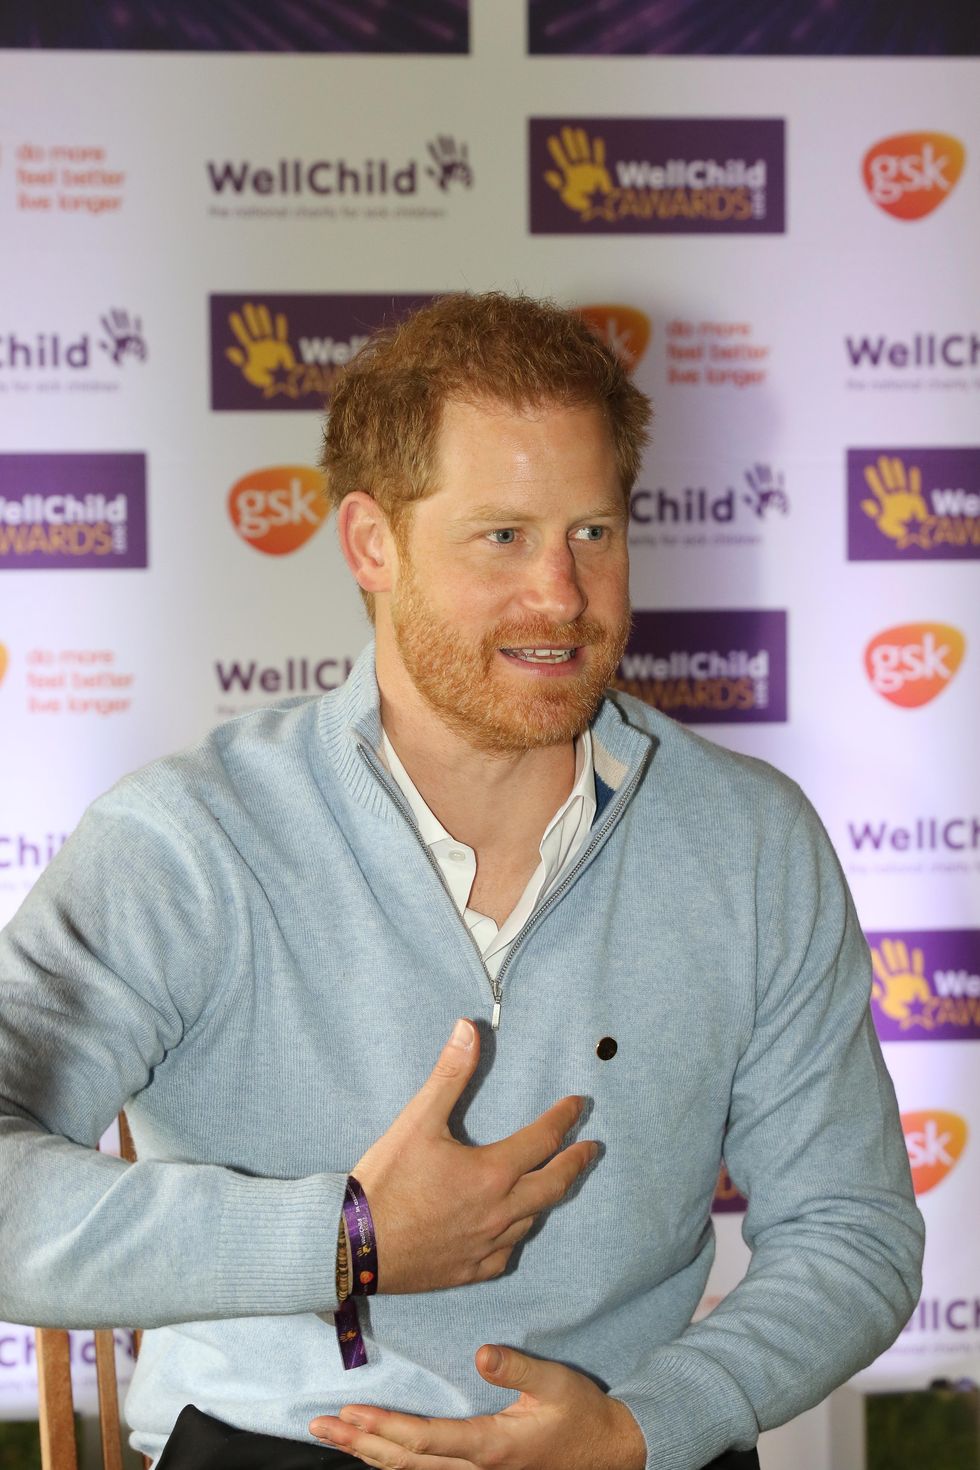 wellchild awards 2021 in association with gsk at kew gardens, london   remarkable children and young people and hard working professionals from across the uk have been named winners in the prestigious national 2021 wellchild awards, in association with gsk they received their awards earlier today june 30th in a surprise visit from wellchild patron, the duke of sussex at a private garden party at kew gardens, in london         3062021picture by antony thompson   thousand word media, no sales, no syndication contact for more information mob 07775556610 web wwwthousandwordmediacom email antonythousandwordmediacomthe photographic copyright © 2021 is exclusively retained by the works creator at all times and sales, syndication or offering the work for future publication to a third party without the photographer's knowledge or agreement is in breach of the copyright designs and patents act 1988, part 1, section 4, 2b please contact the photographer should you have any questions with regard to the use of the attached work and any rights involved